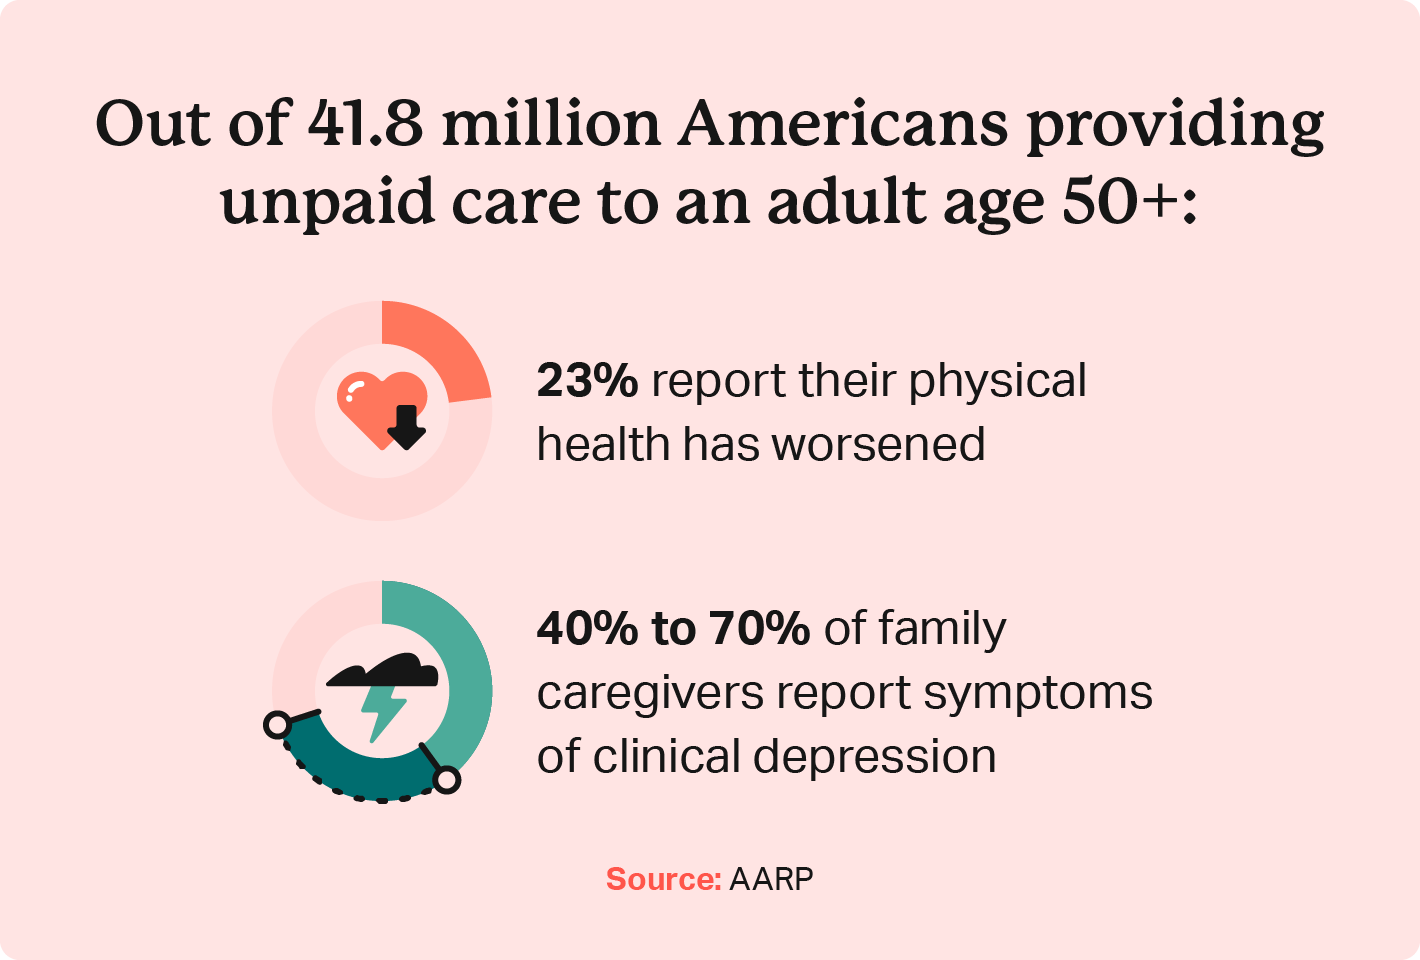 Illustration shows statistics on how many Americans provide unpaid care for seniors